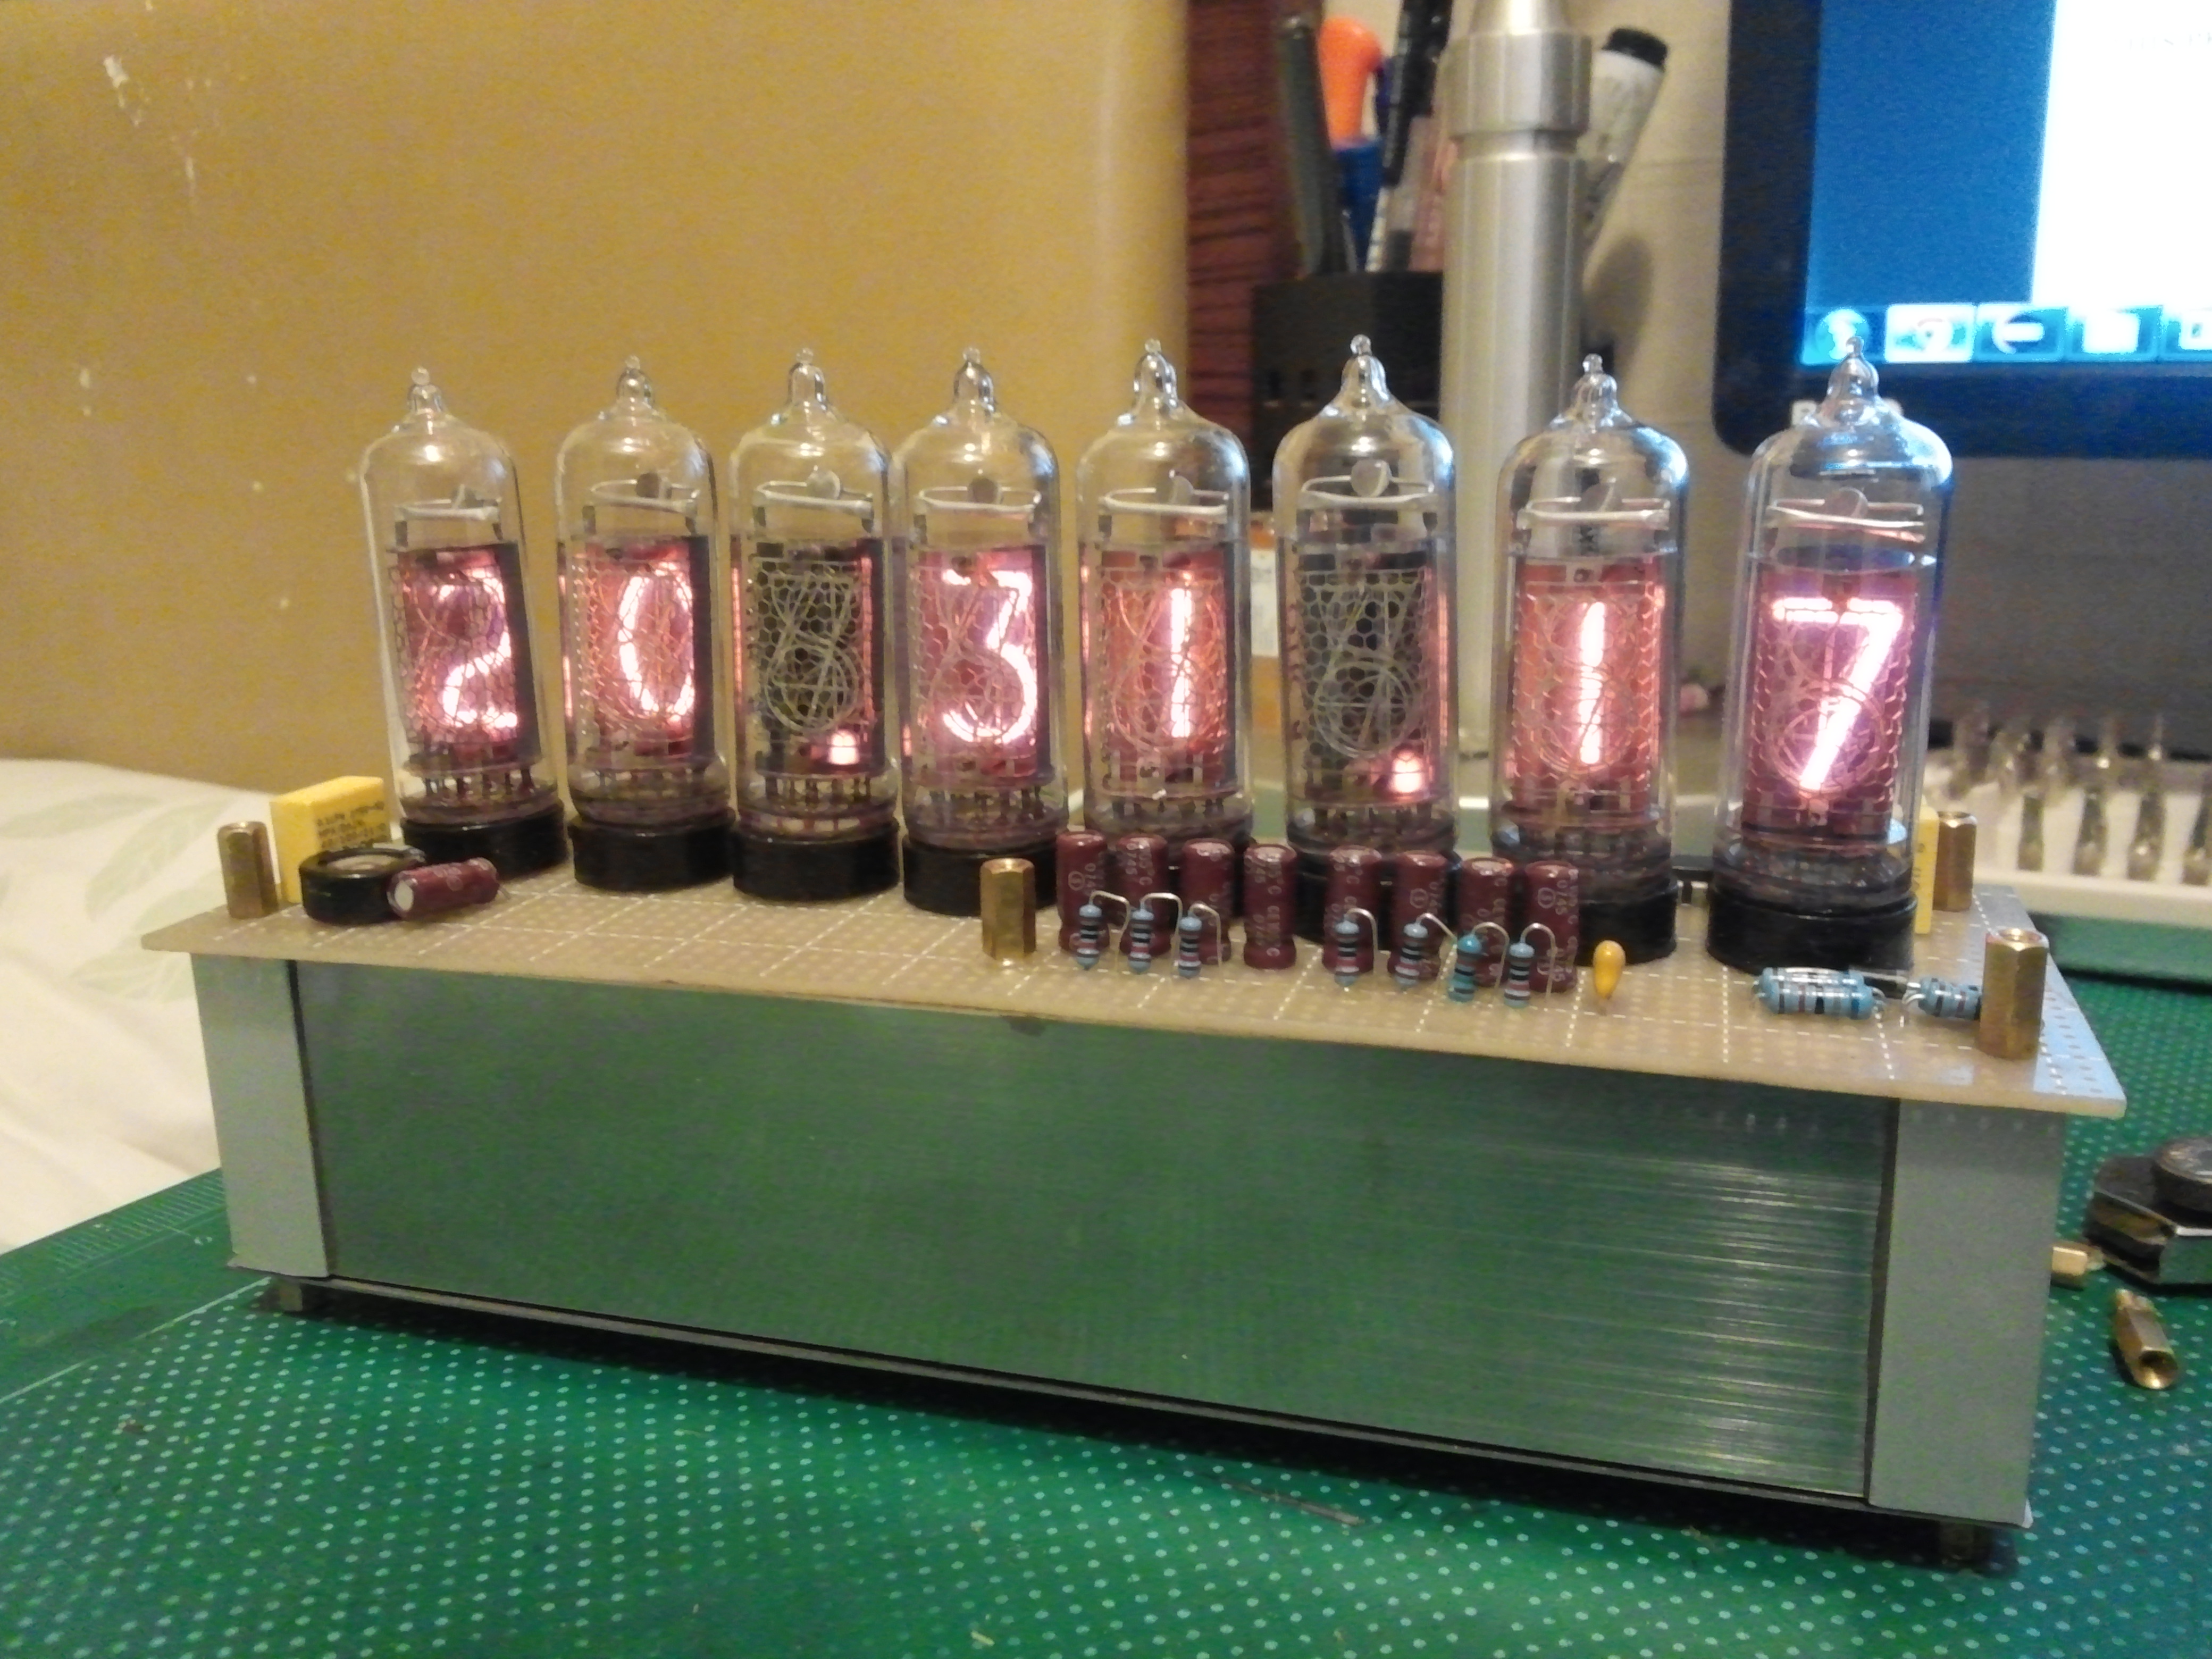 The front view of the completed divergence meter in clock mode 